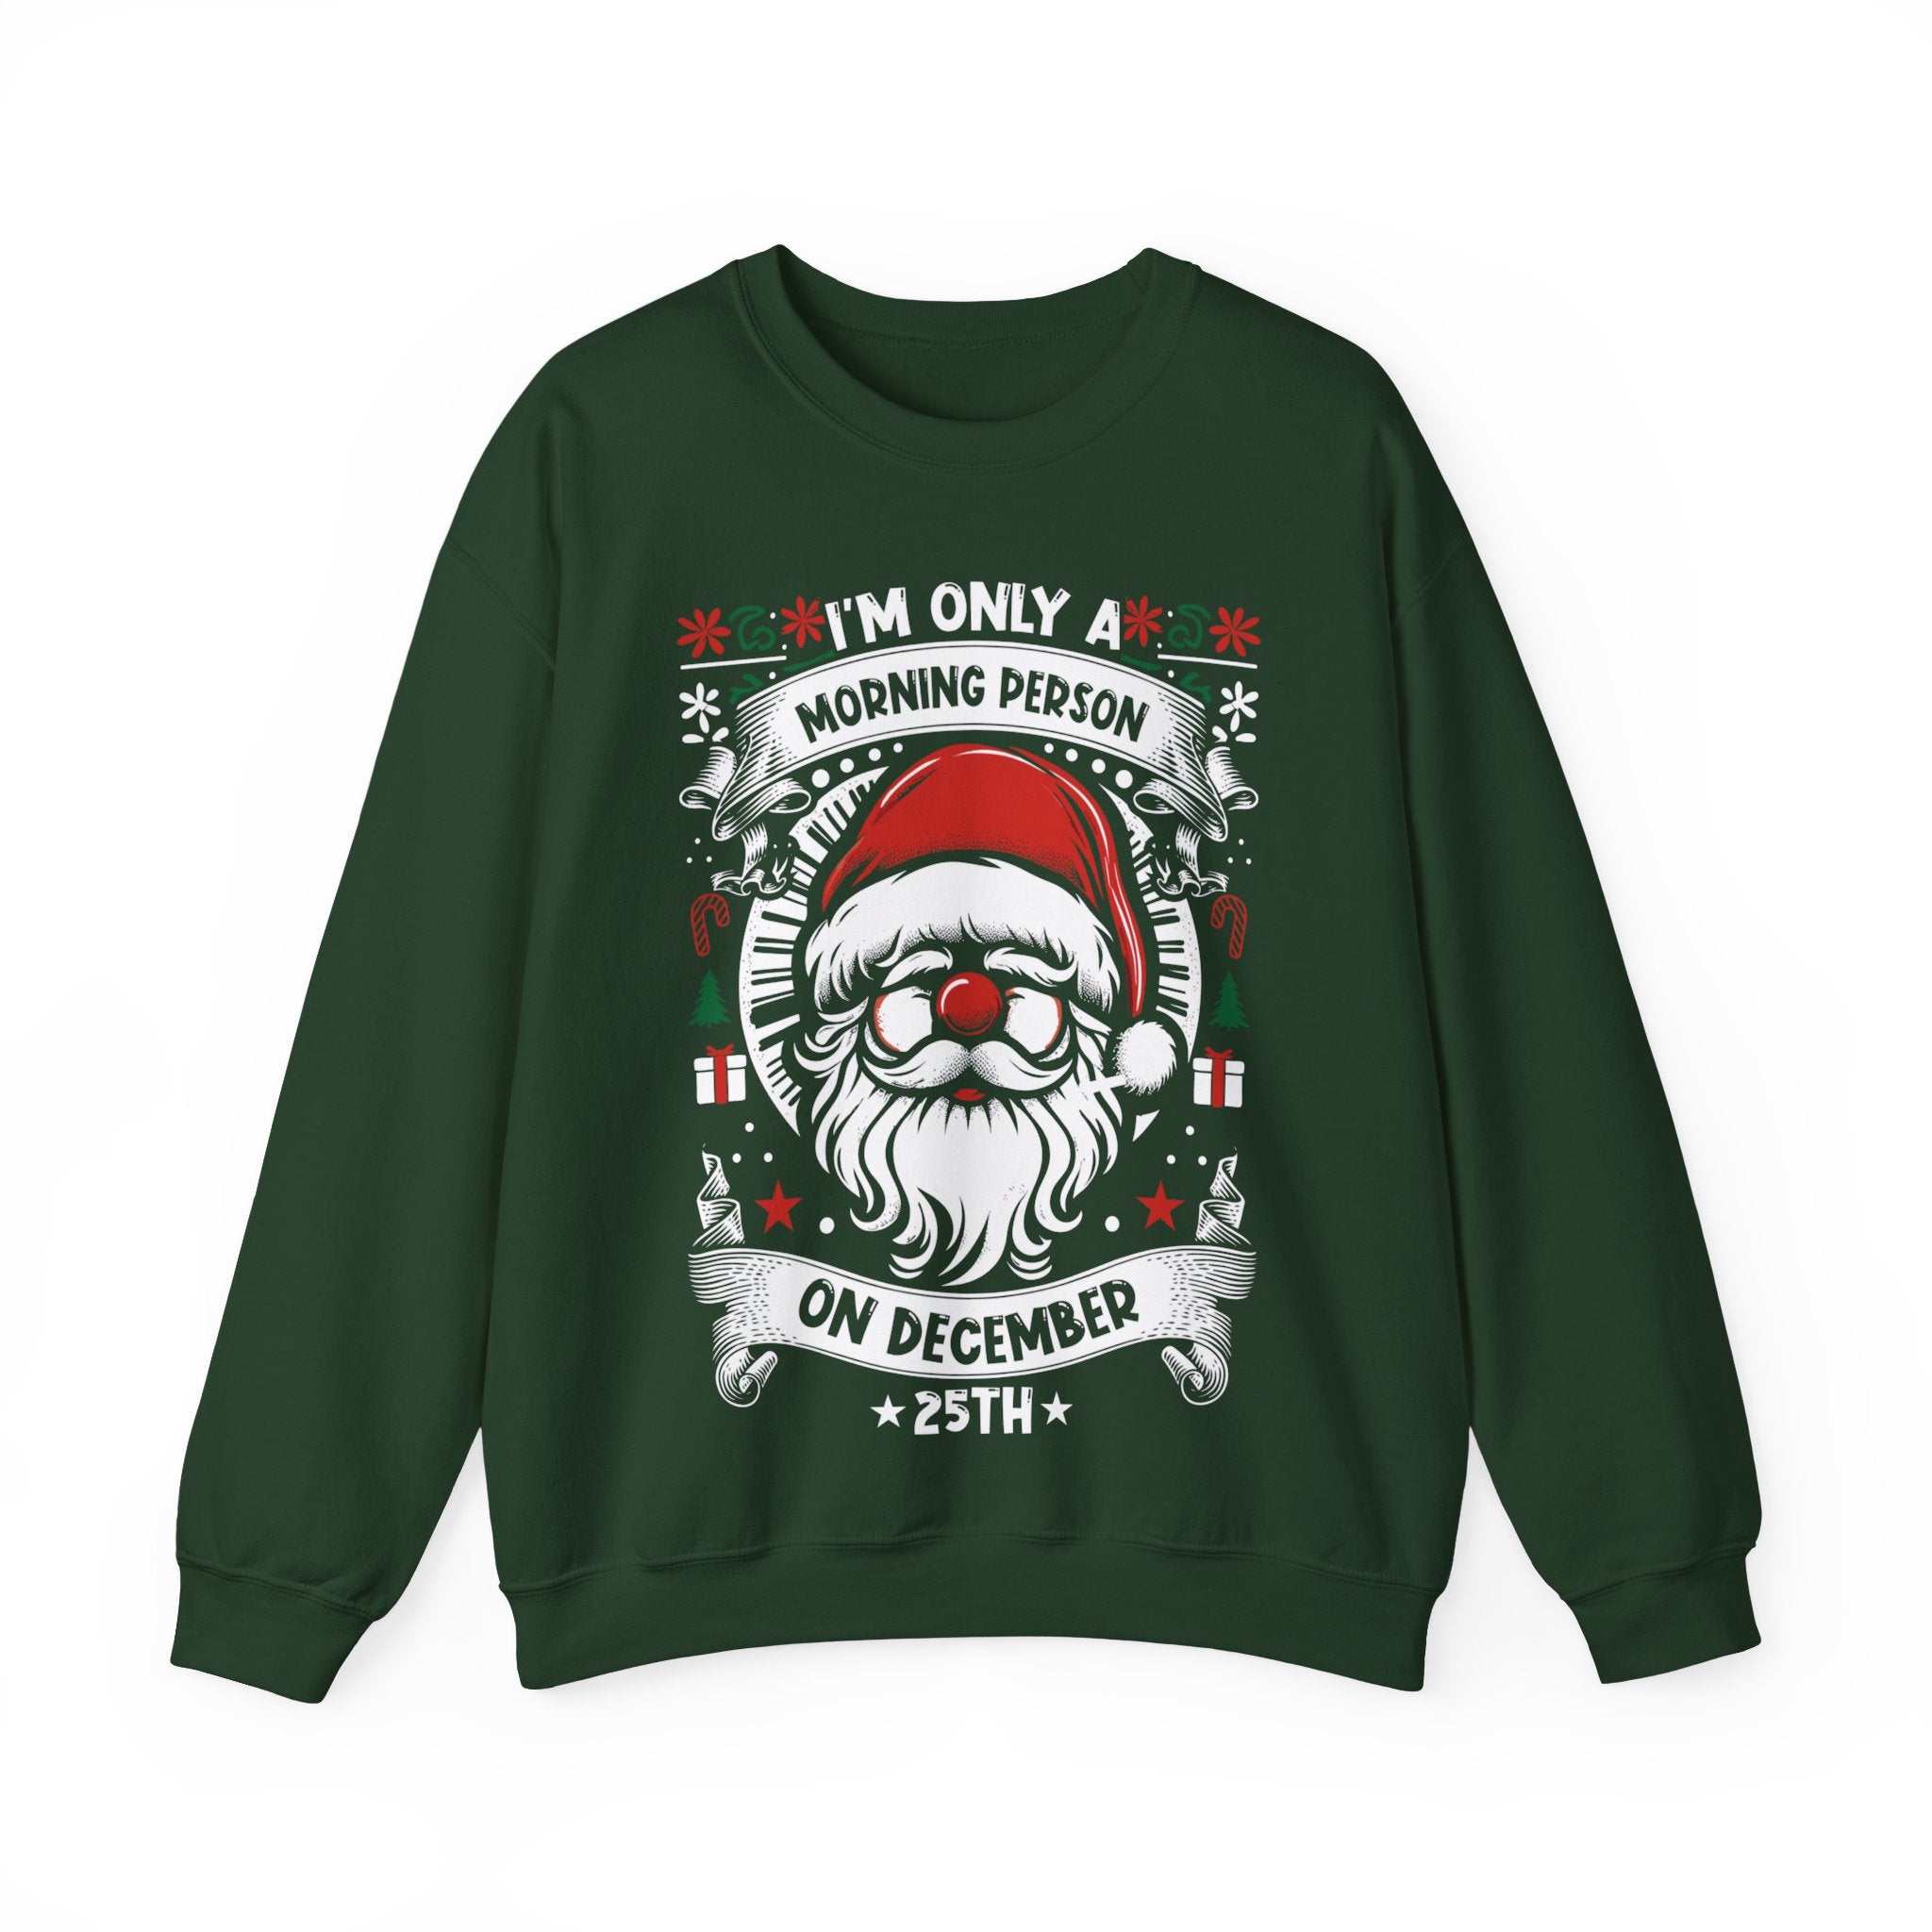 "I'm Only A Morning Person" Christmas Sweatshirt